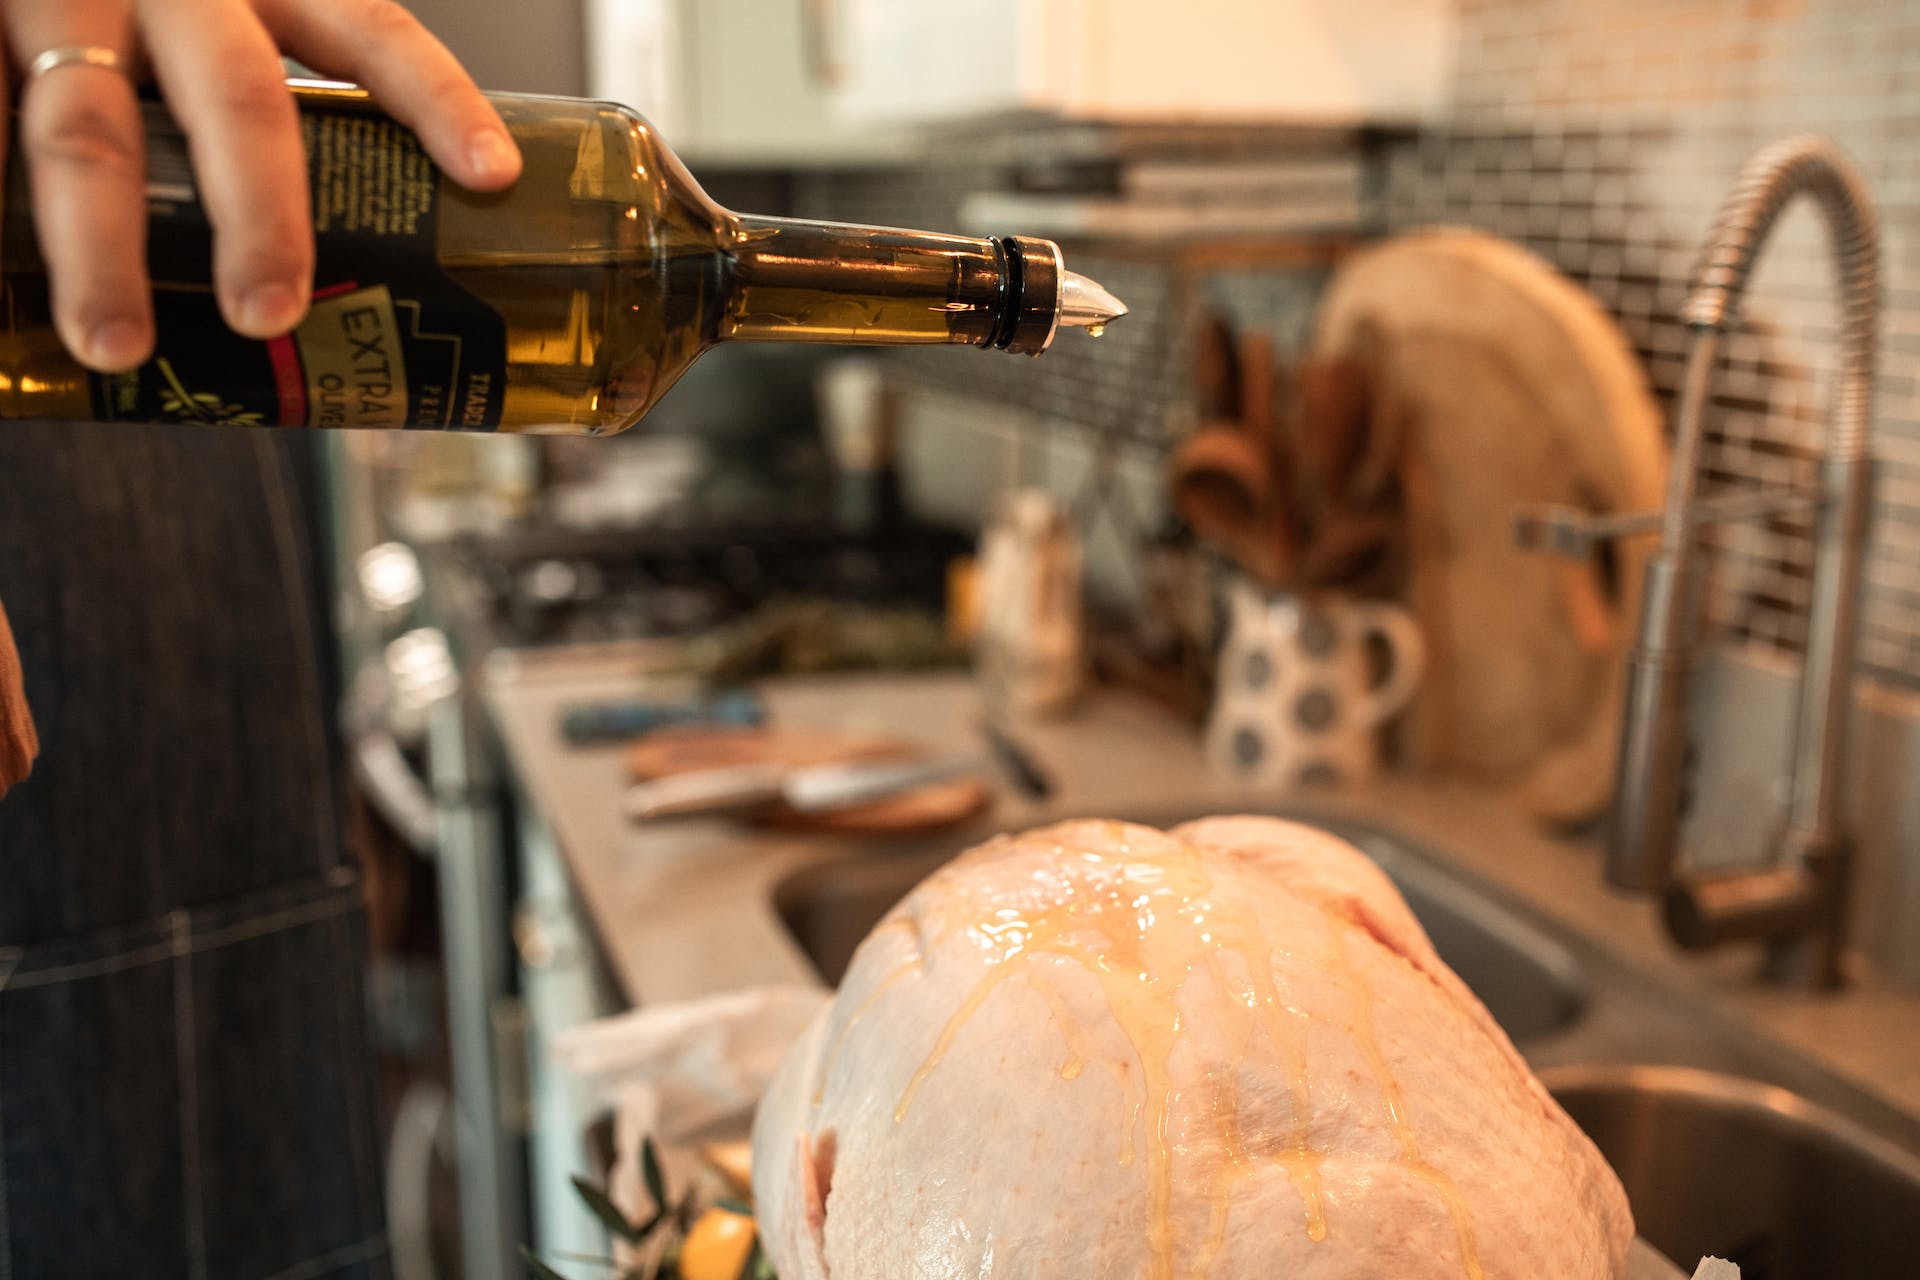 A hand holds a bottle of olive oil, drizzling the oil over a raw turkey against the backdrop of a kitchen